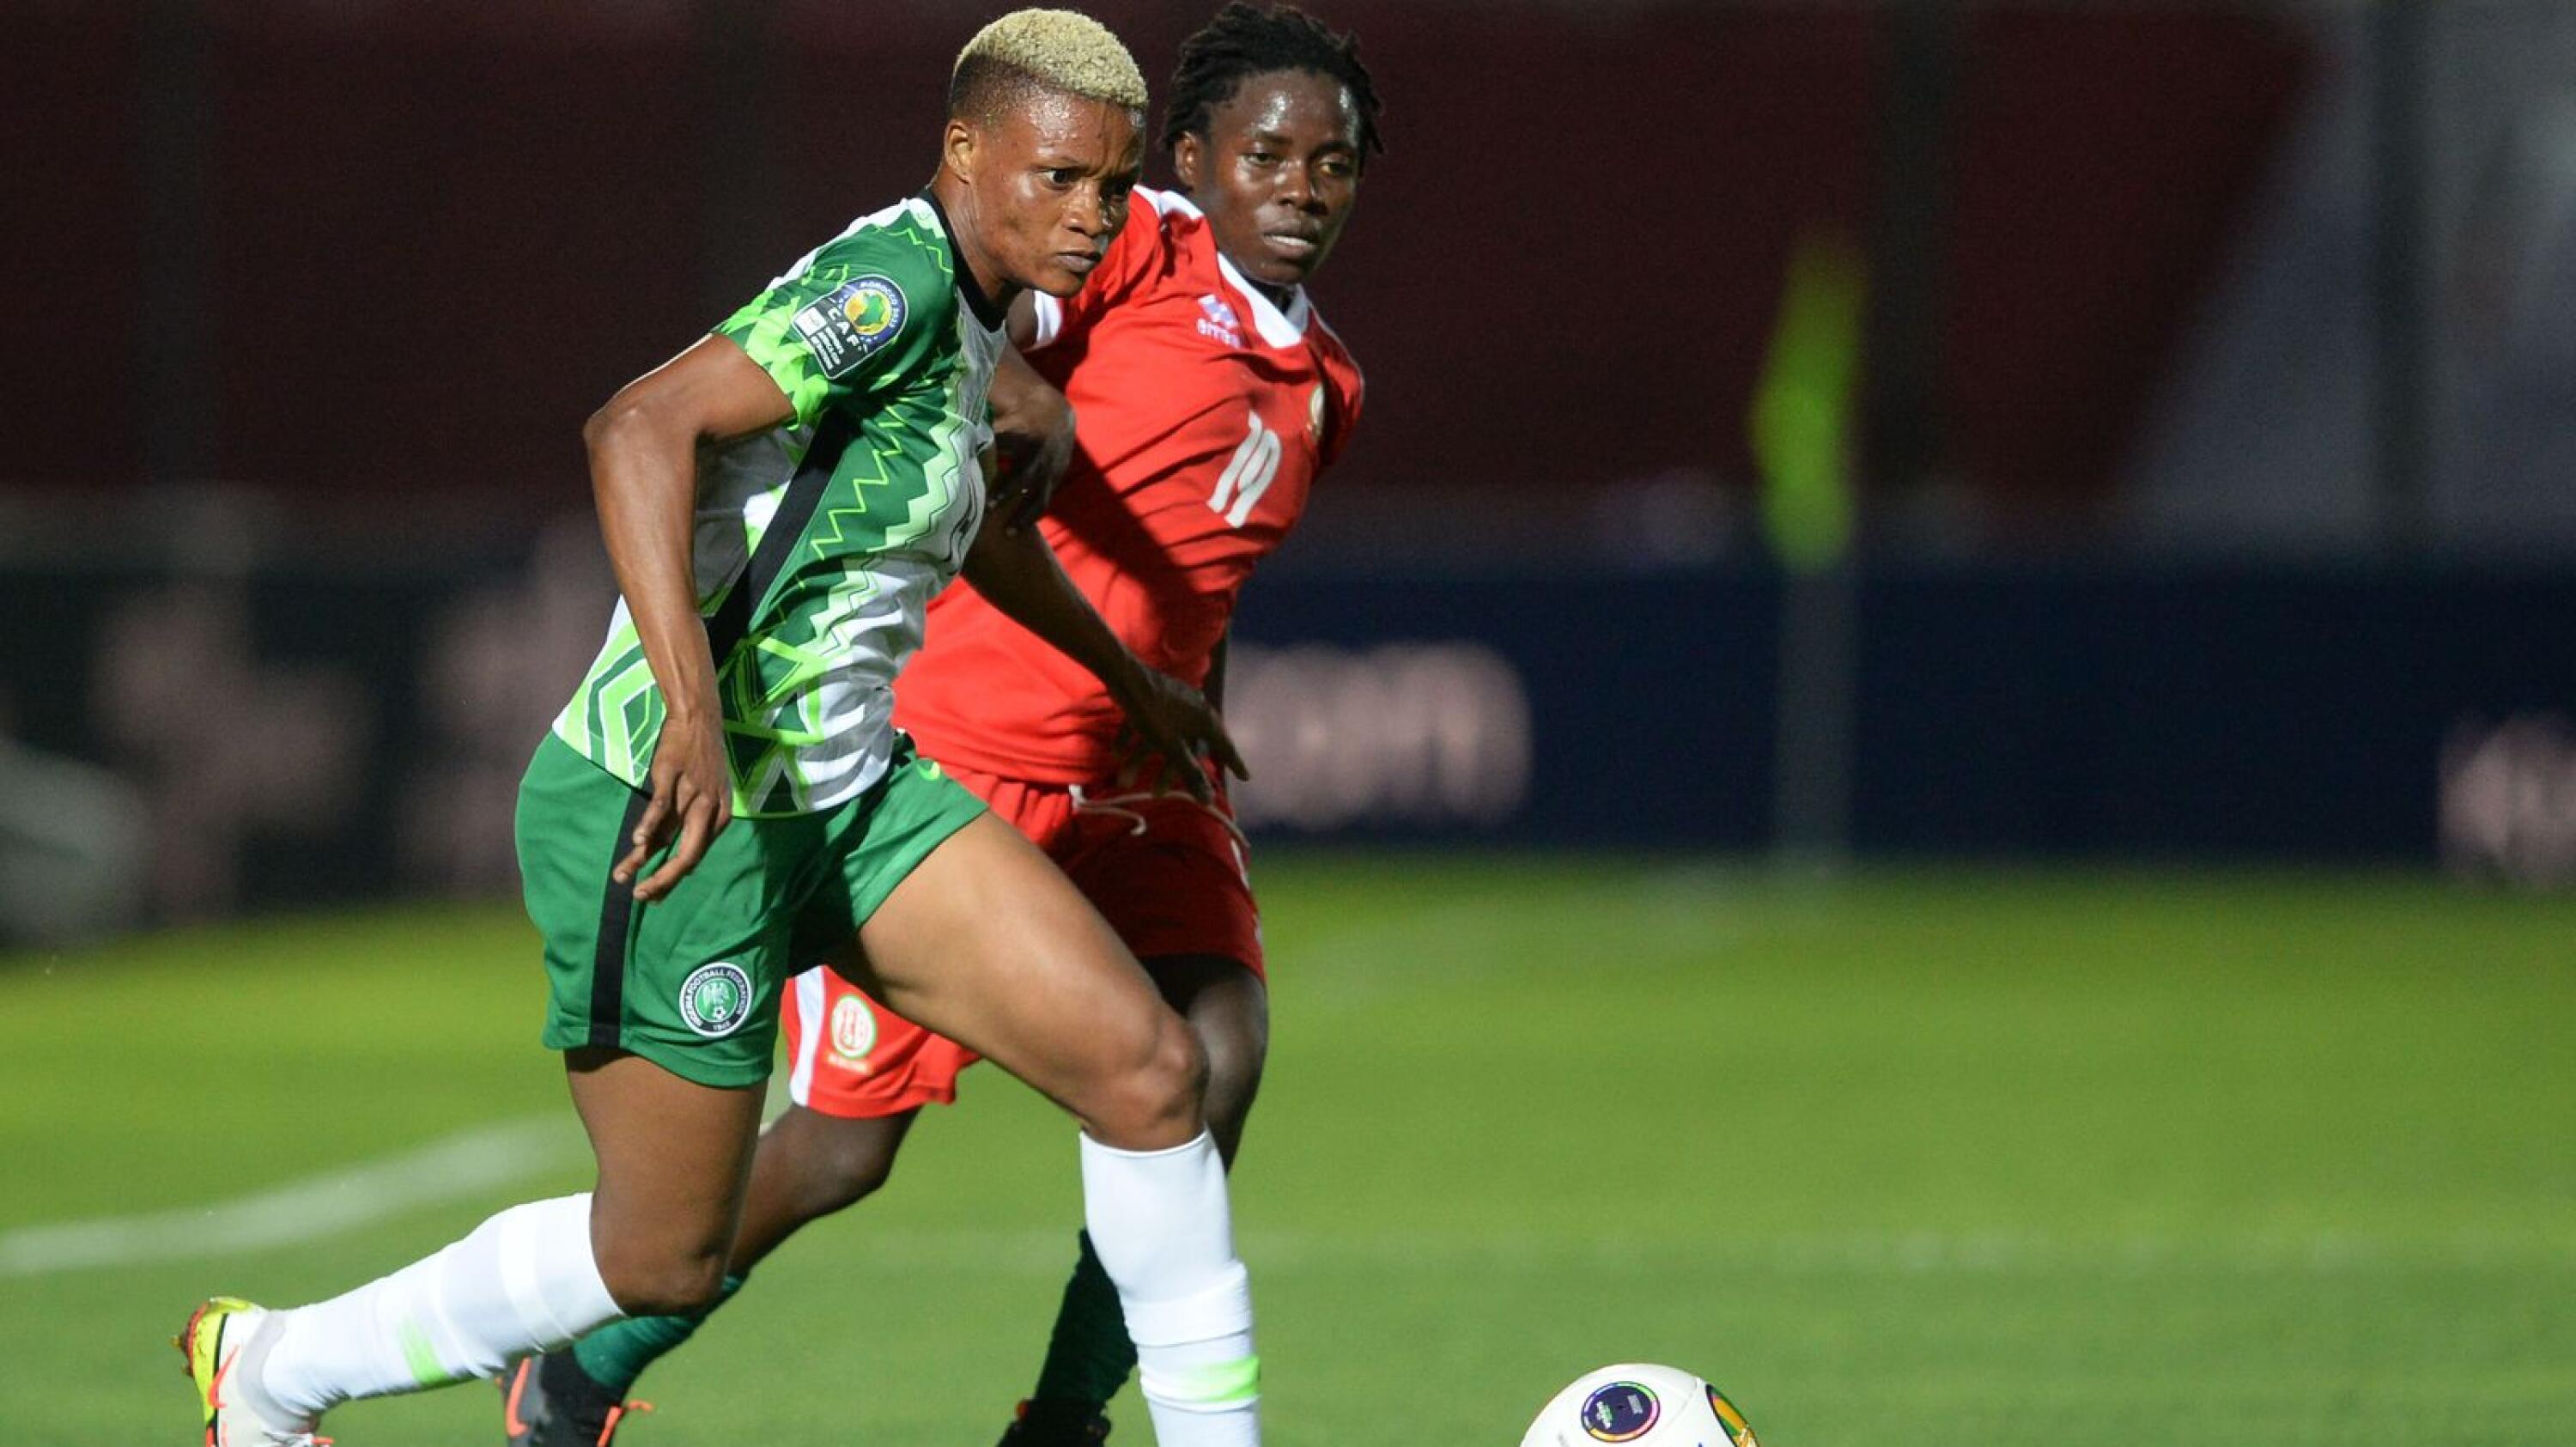 Vivian Obianujuwan Ikechukwu of Nigeria is challenged by Rachelle Bukuru of Burundi during the 2022 Women’s Africa Cup of Nations game at Stade Prince Moulay Al Hassan in Rabat